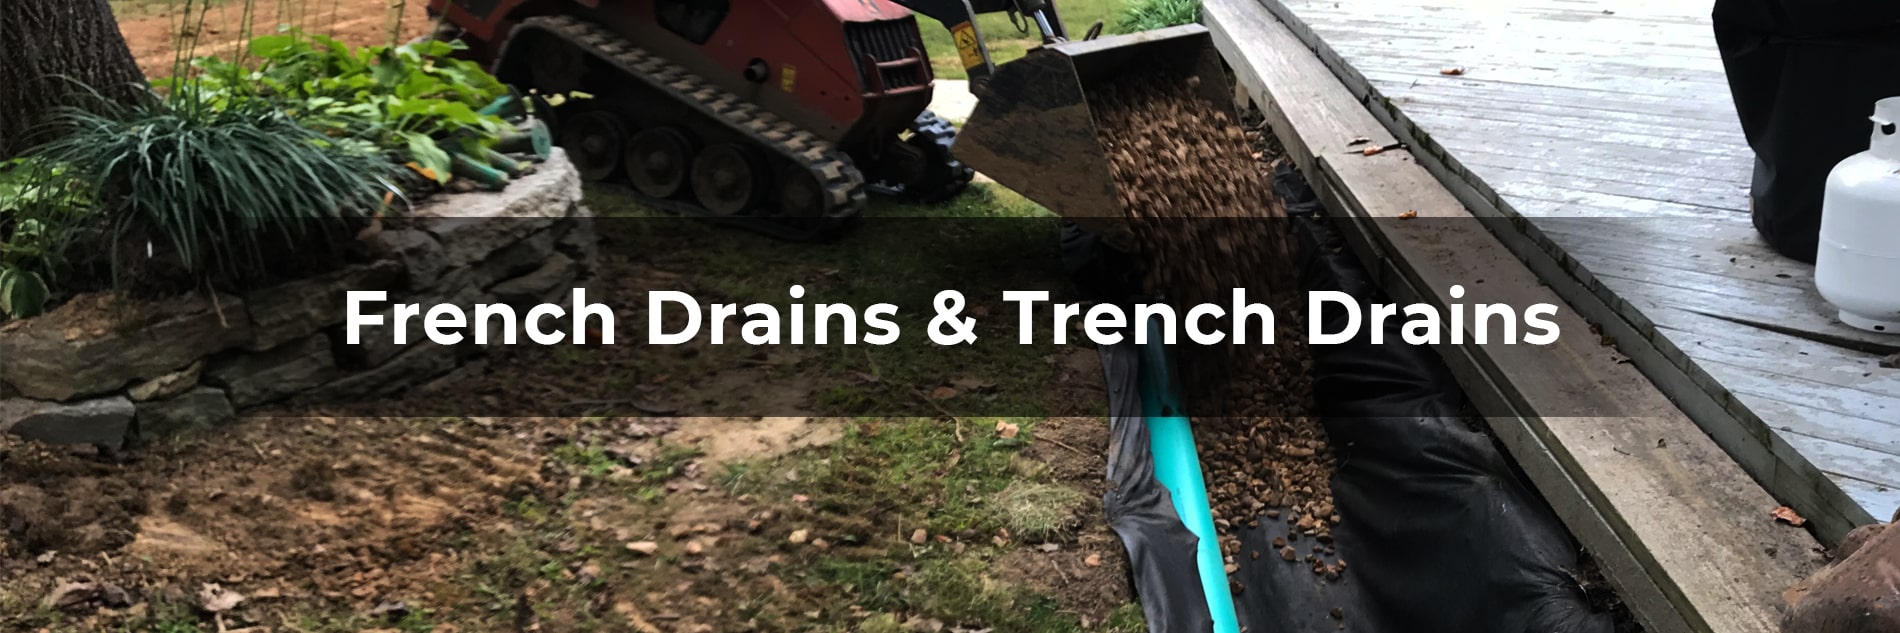 French Drains & Trench Drains | Drainage Solutions